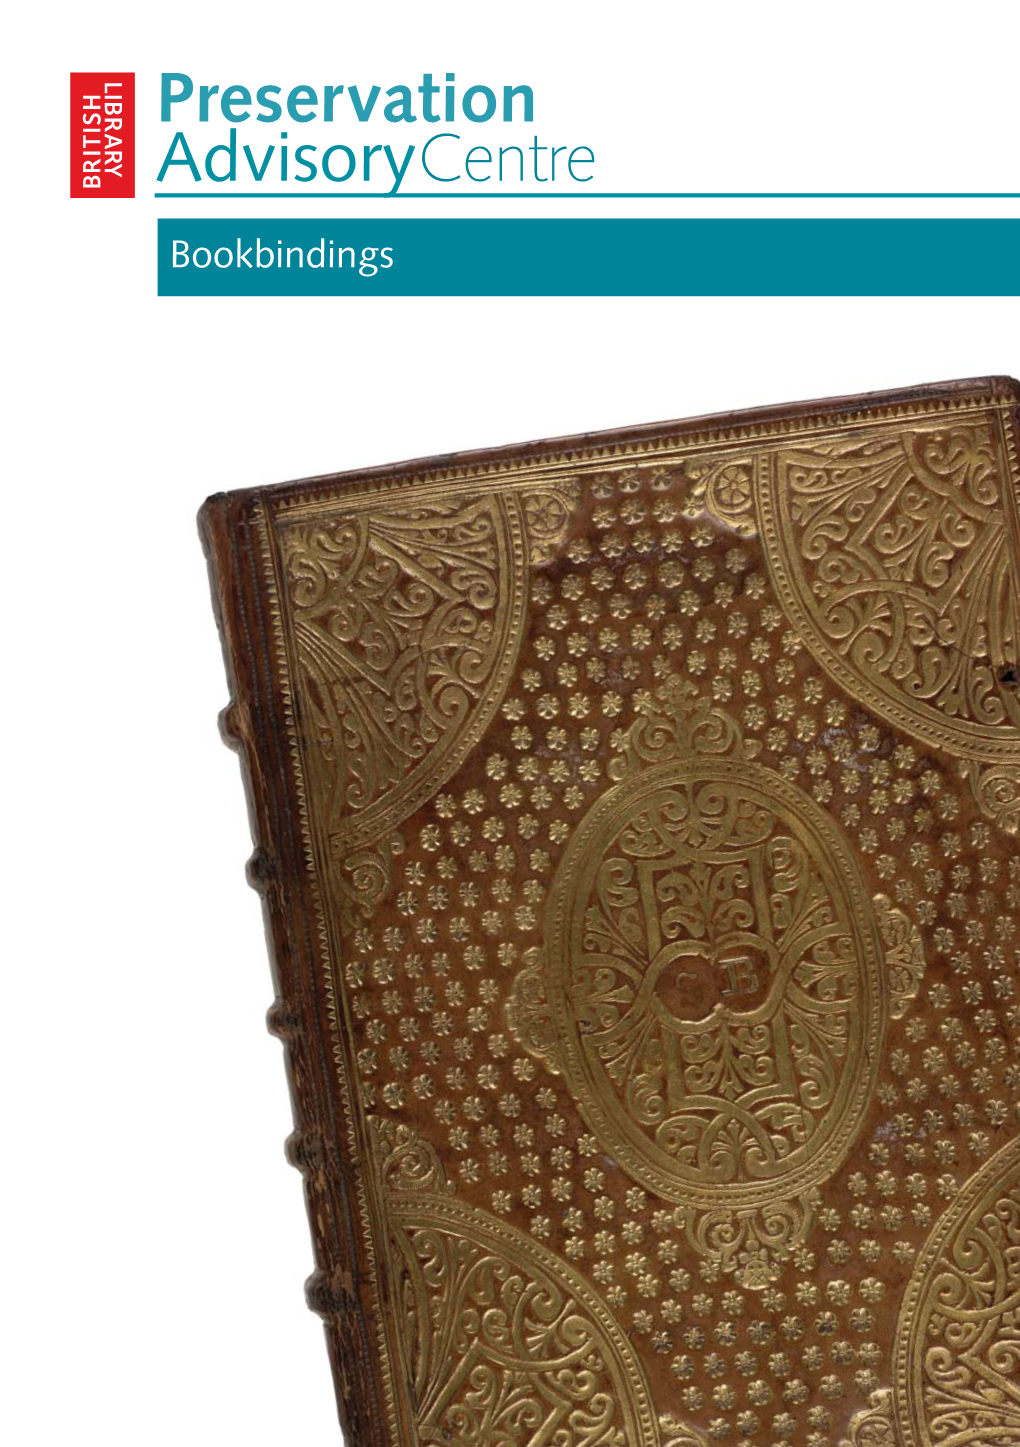 Understanding and Caring for Bookbindings